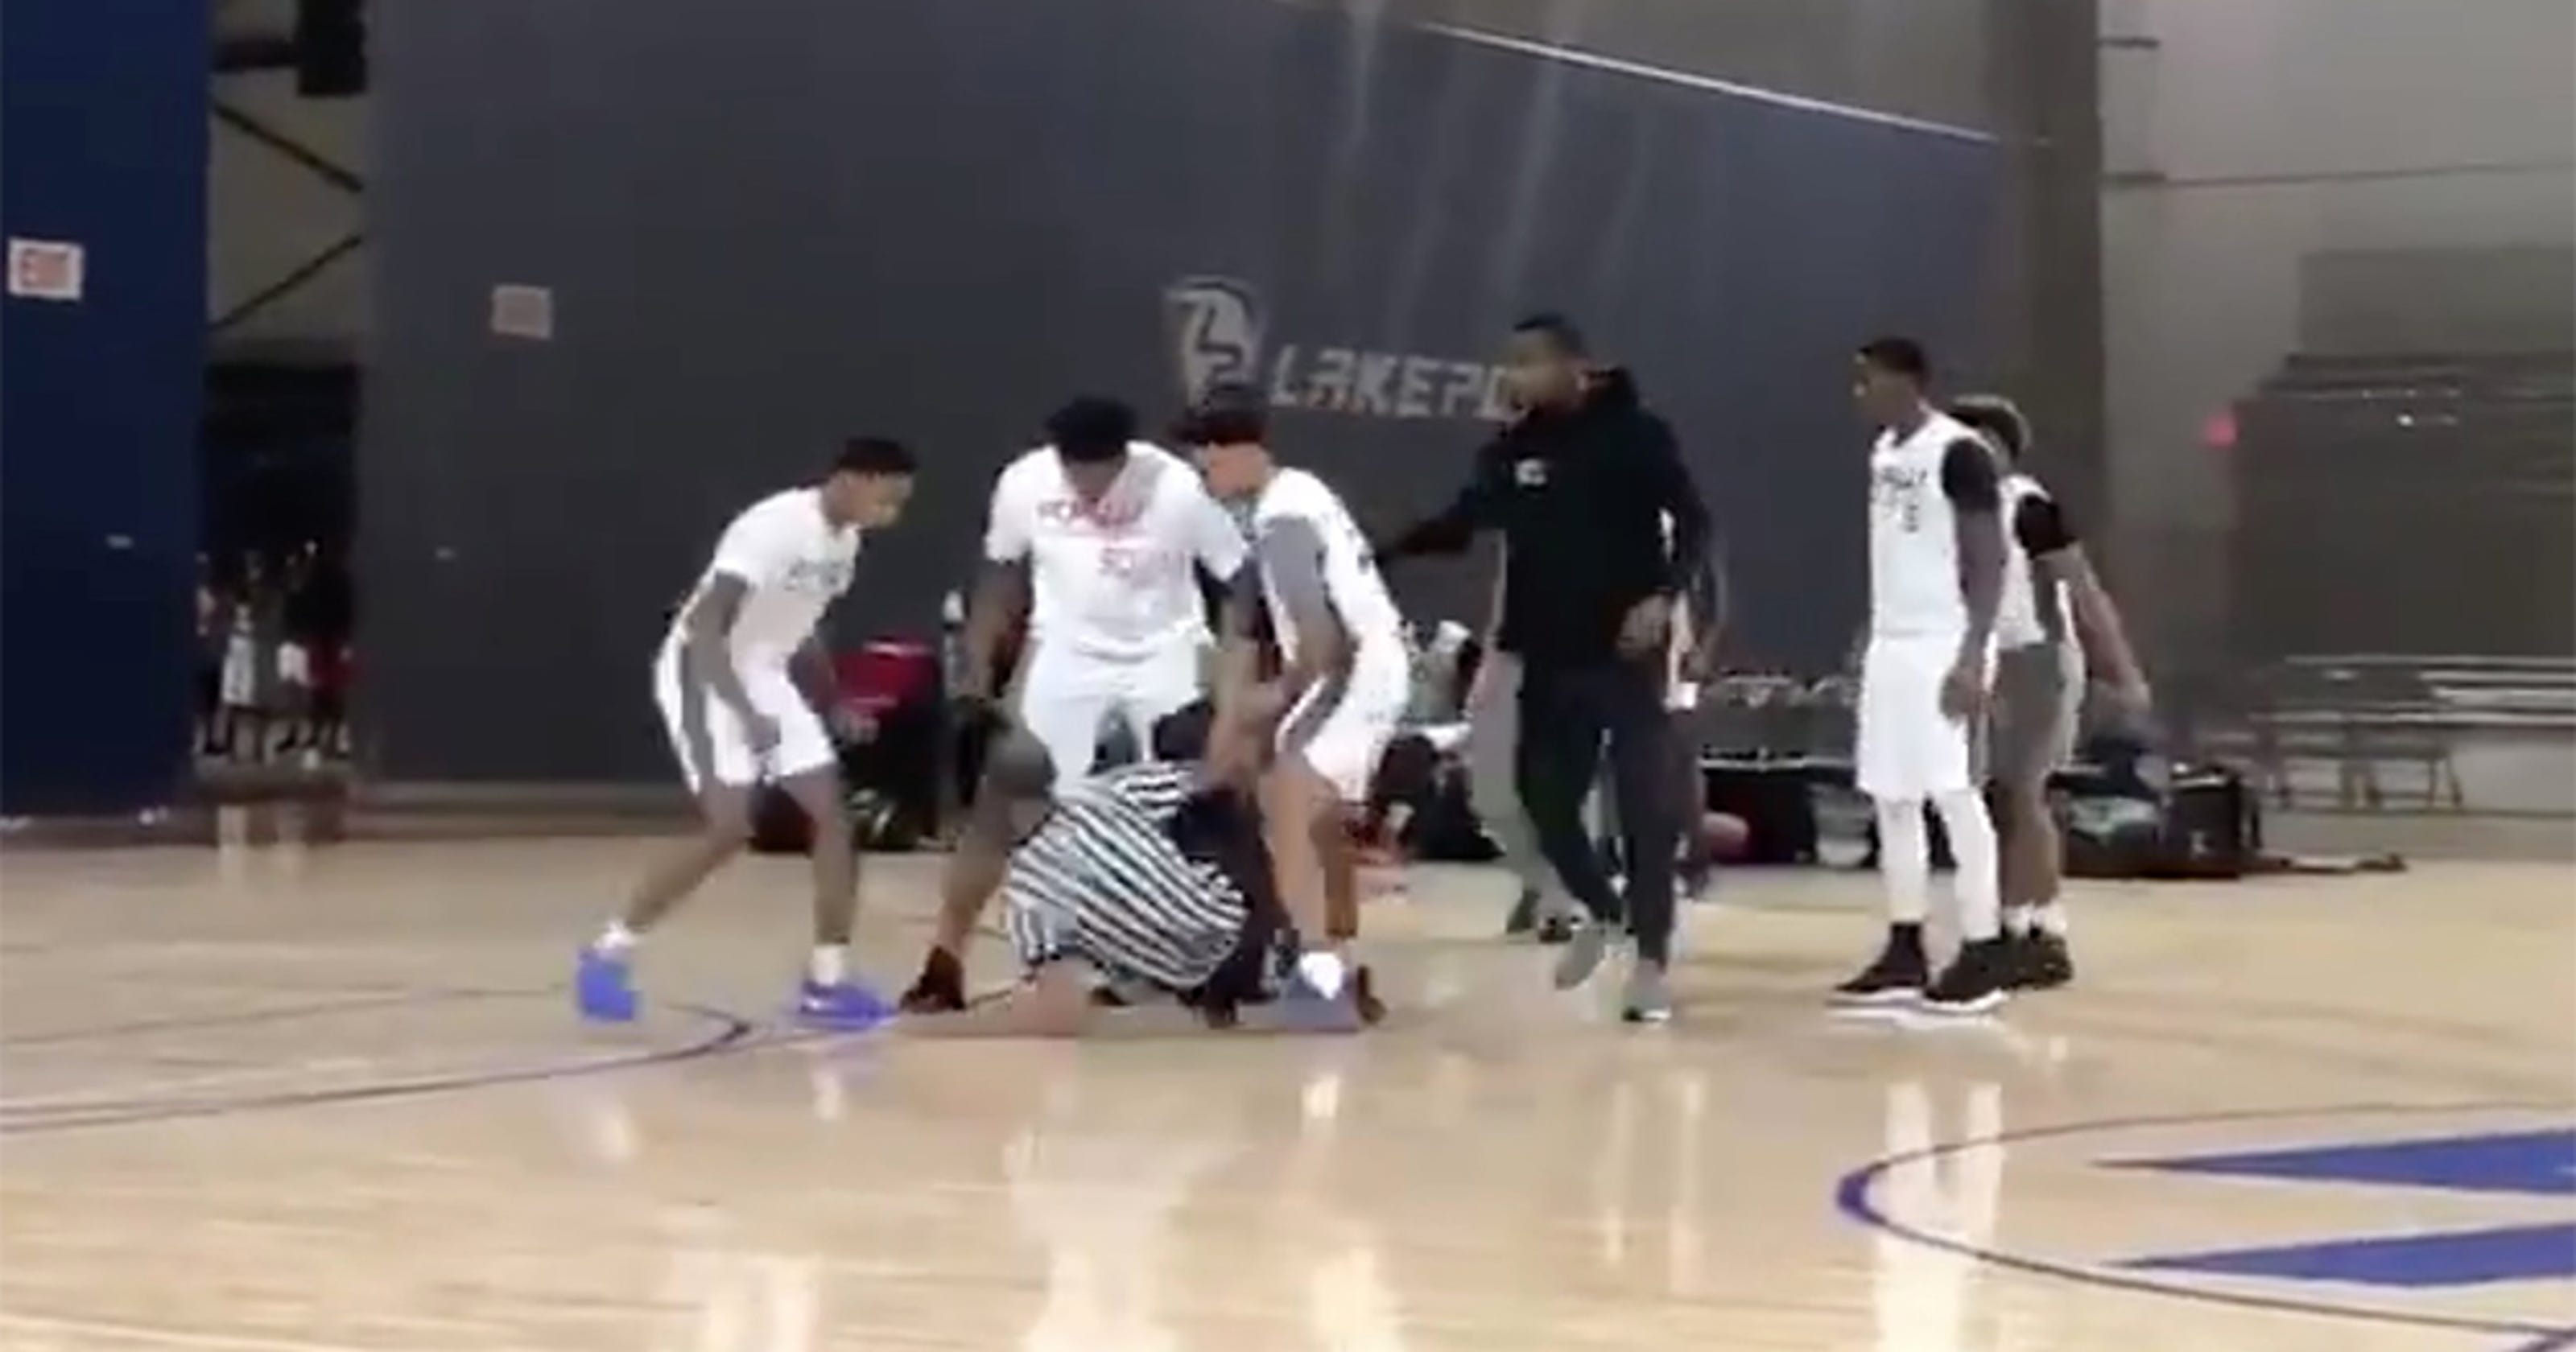 Players and referees brawl at AAU basketball game in Atlanta